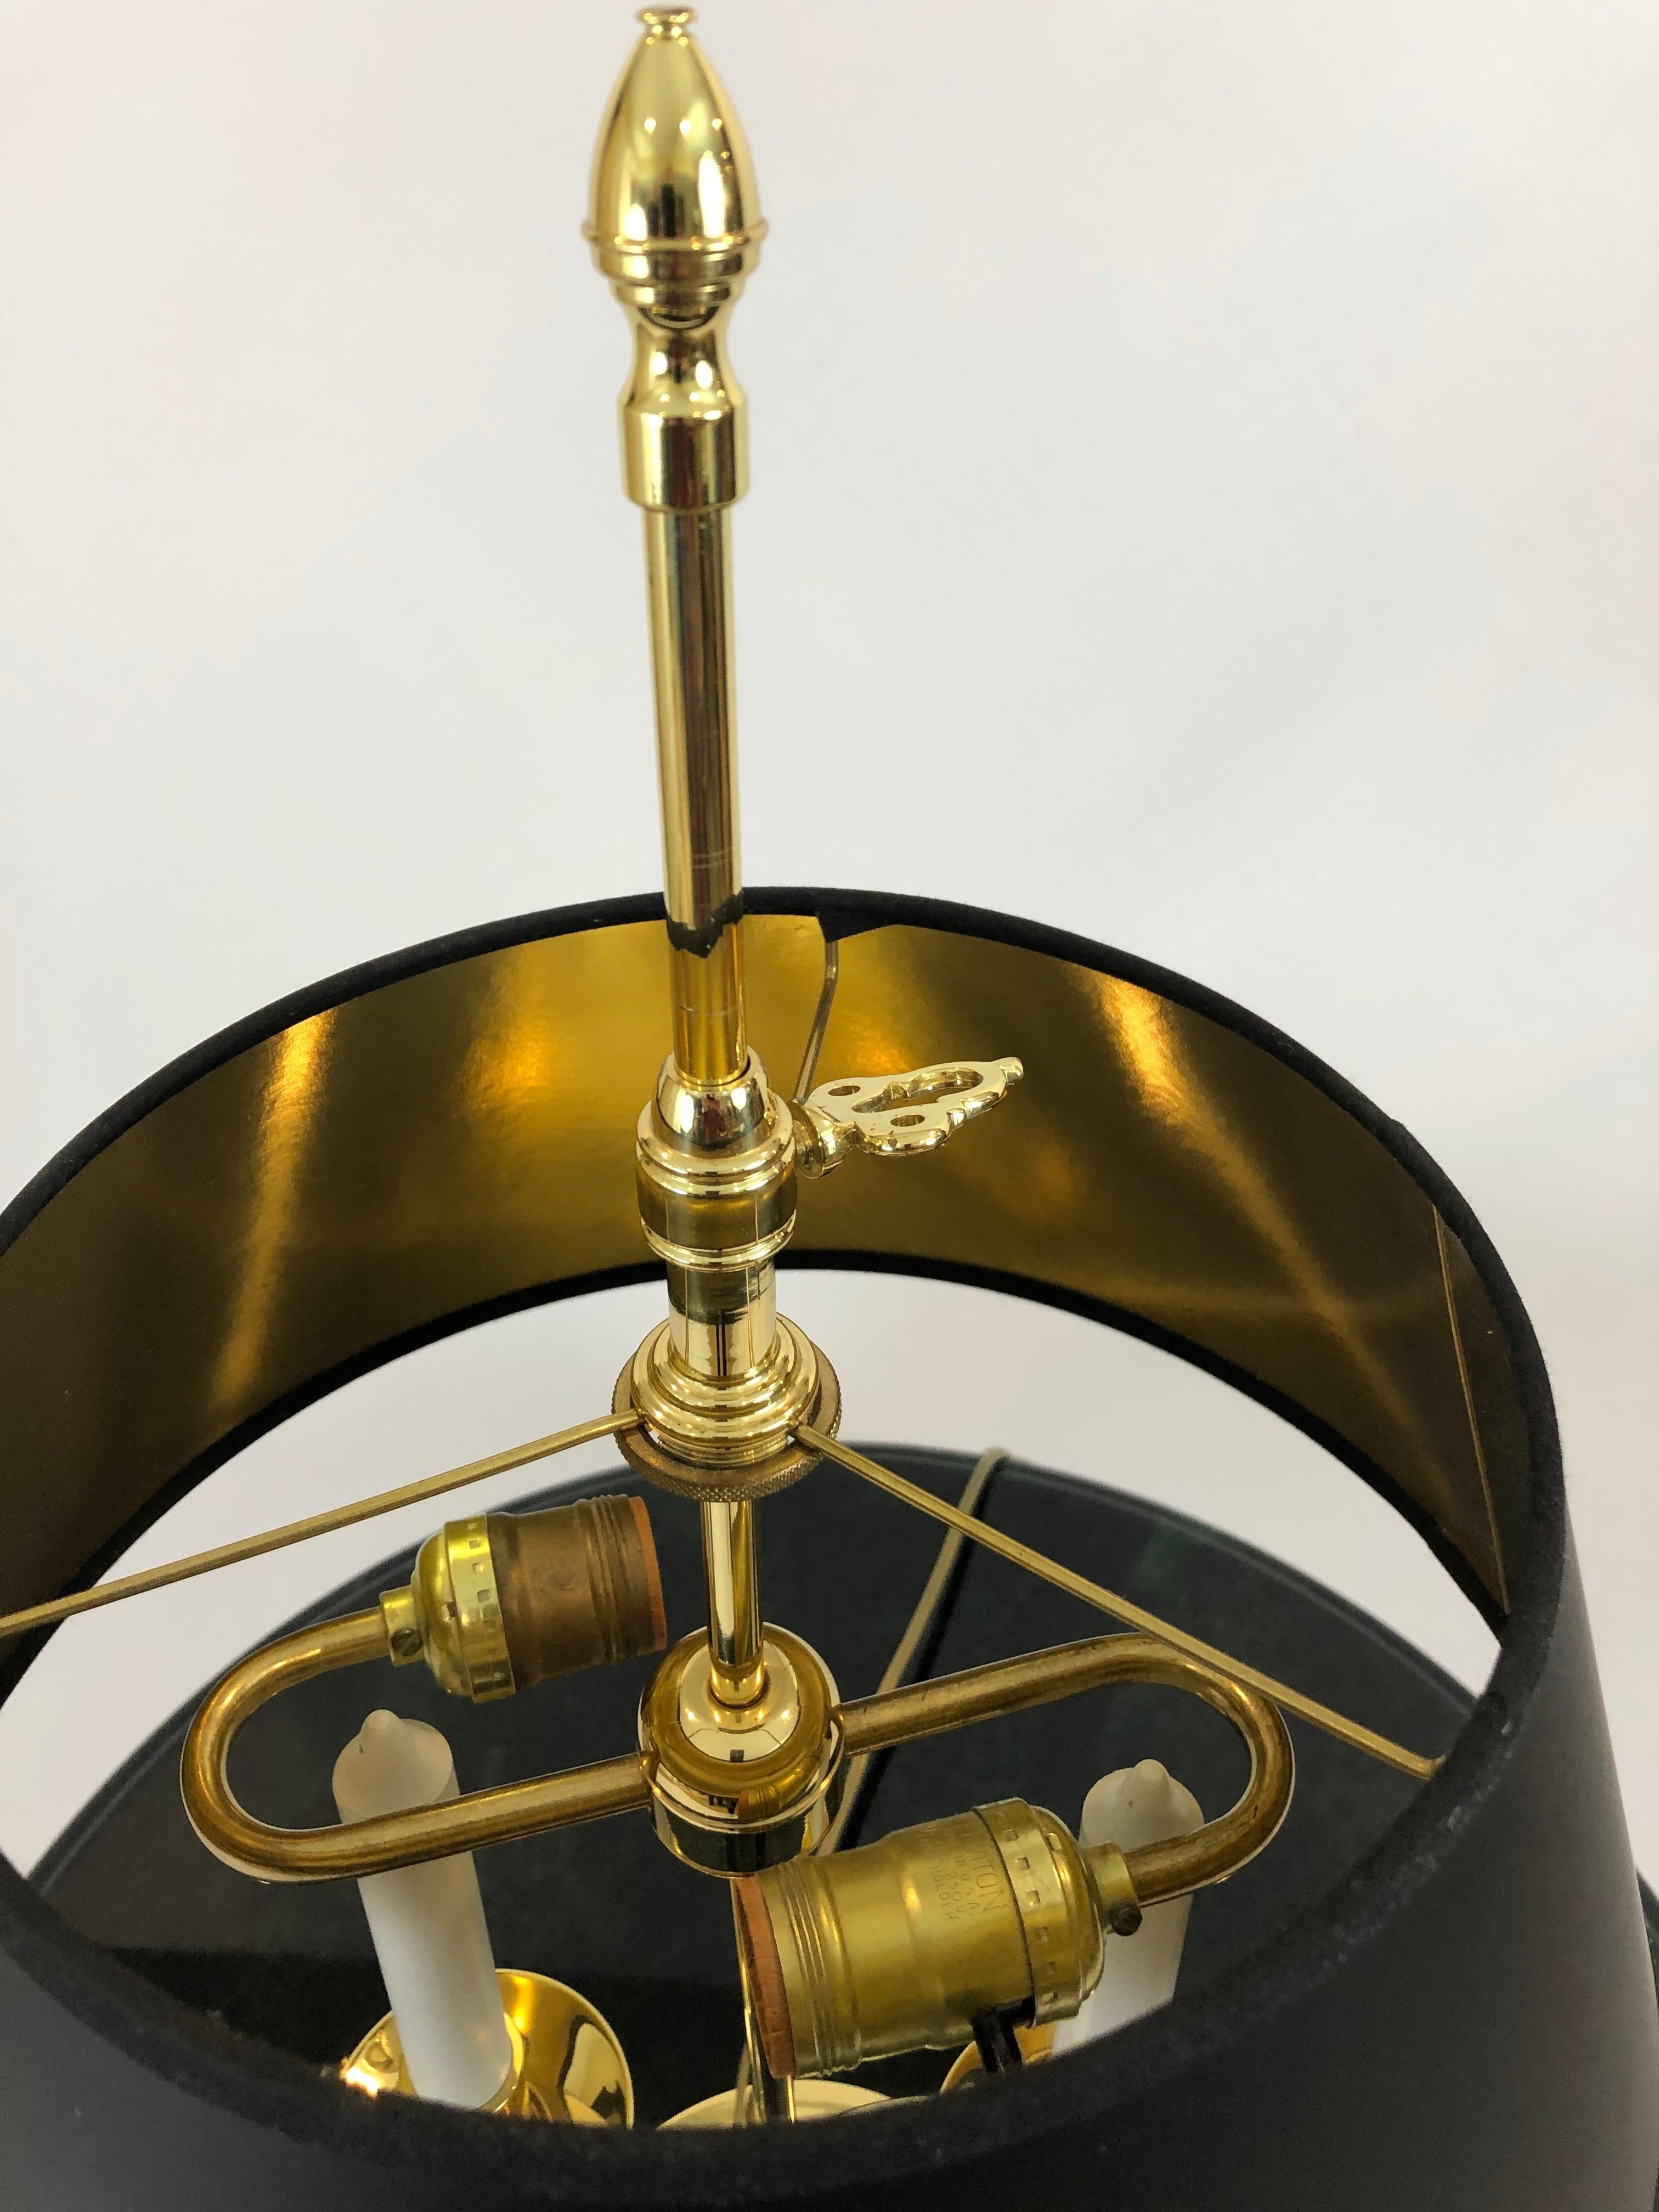 Great looking brass accent lamp by Baldwin having prezel like curlicues terminating in brass cups supported by fabulous crane faces. Handsome custom black shade lined in gold foil, brass key and decorative finial.
Base is 8.5 W x 23 H.